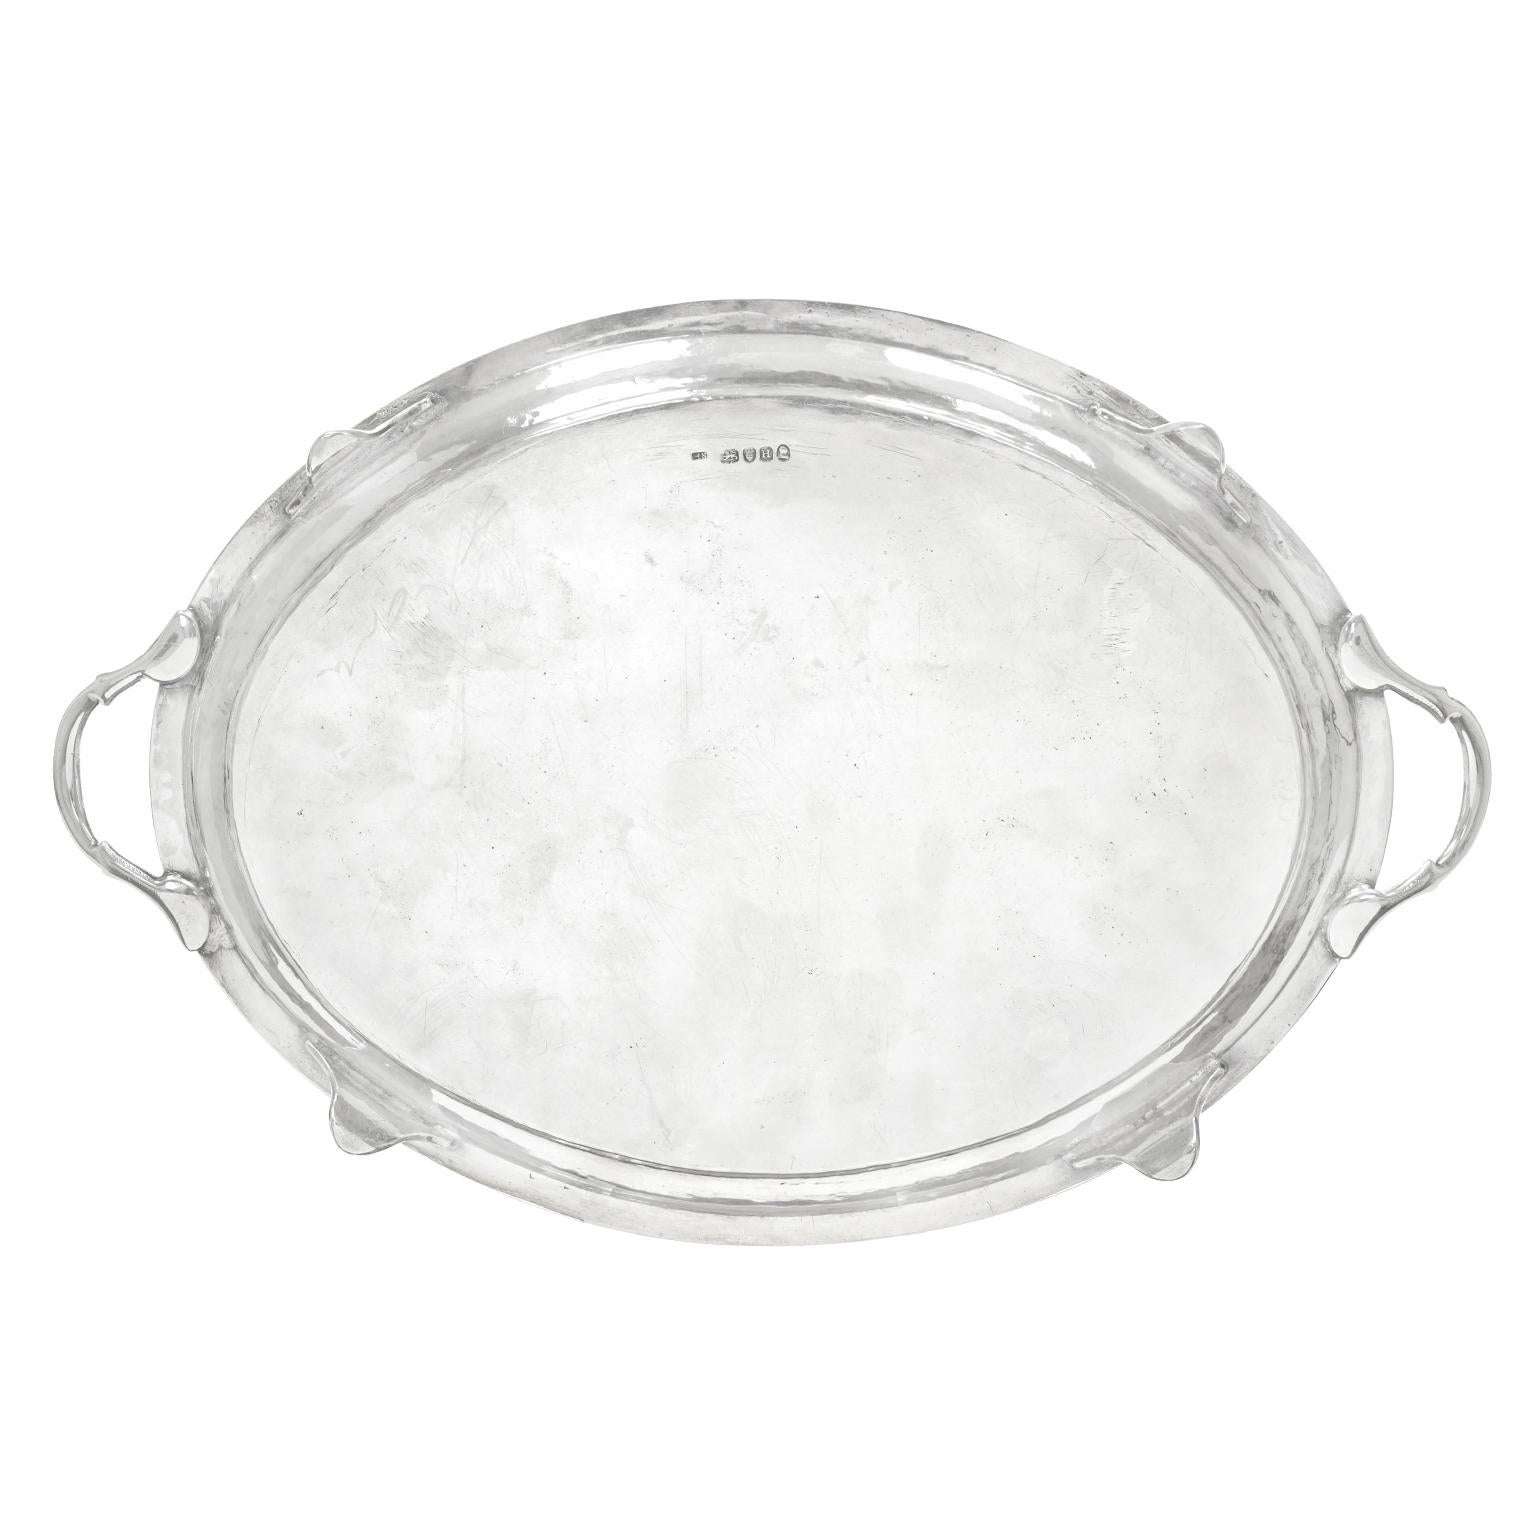 Georgian George III Sterling Silver Footed Oval Tray, London, 1803-1804